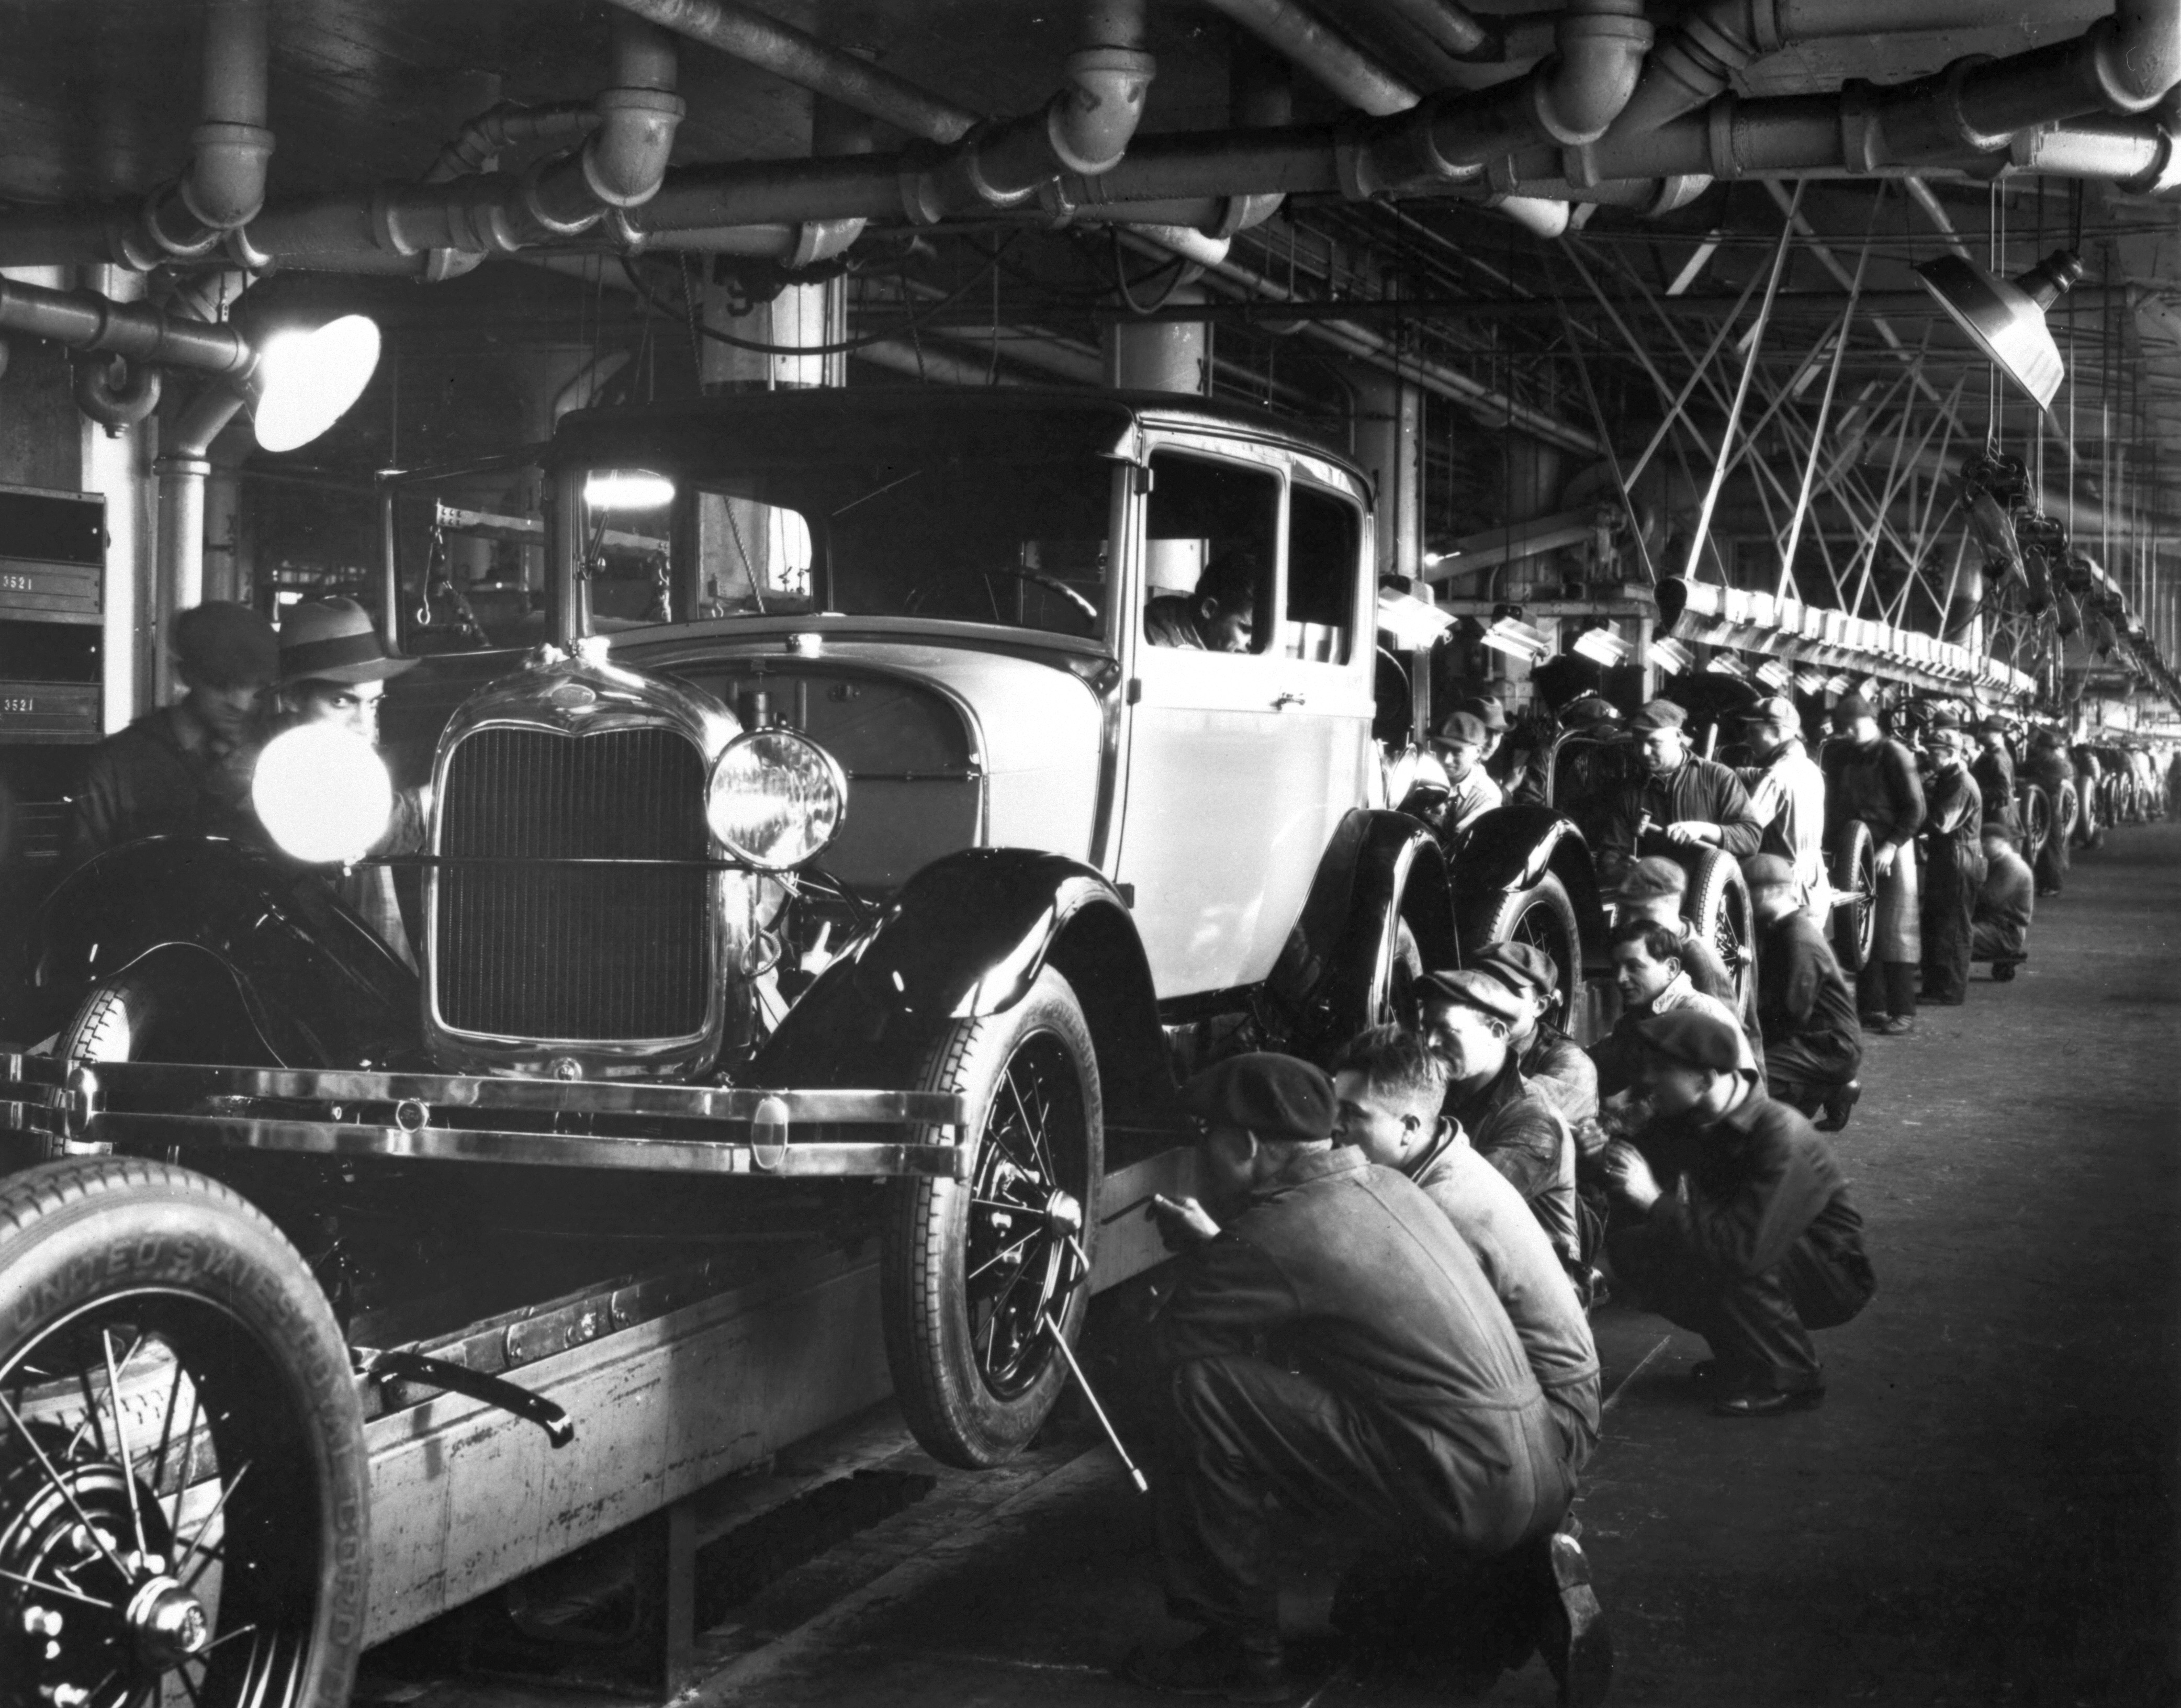 Rouge plant, Ford celebrates 100 years of production at the Rouge, ClassicCars.com Journal